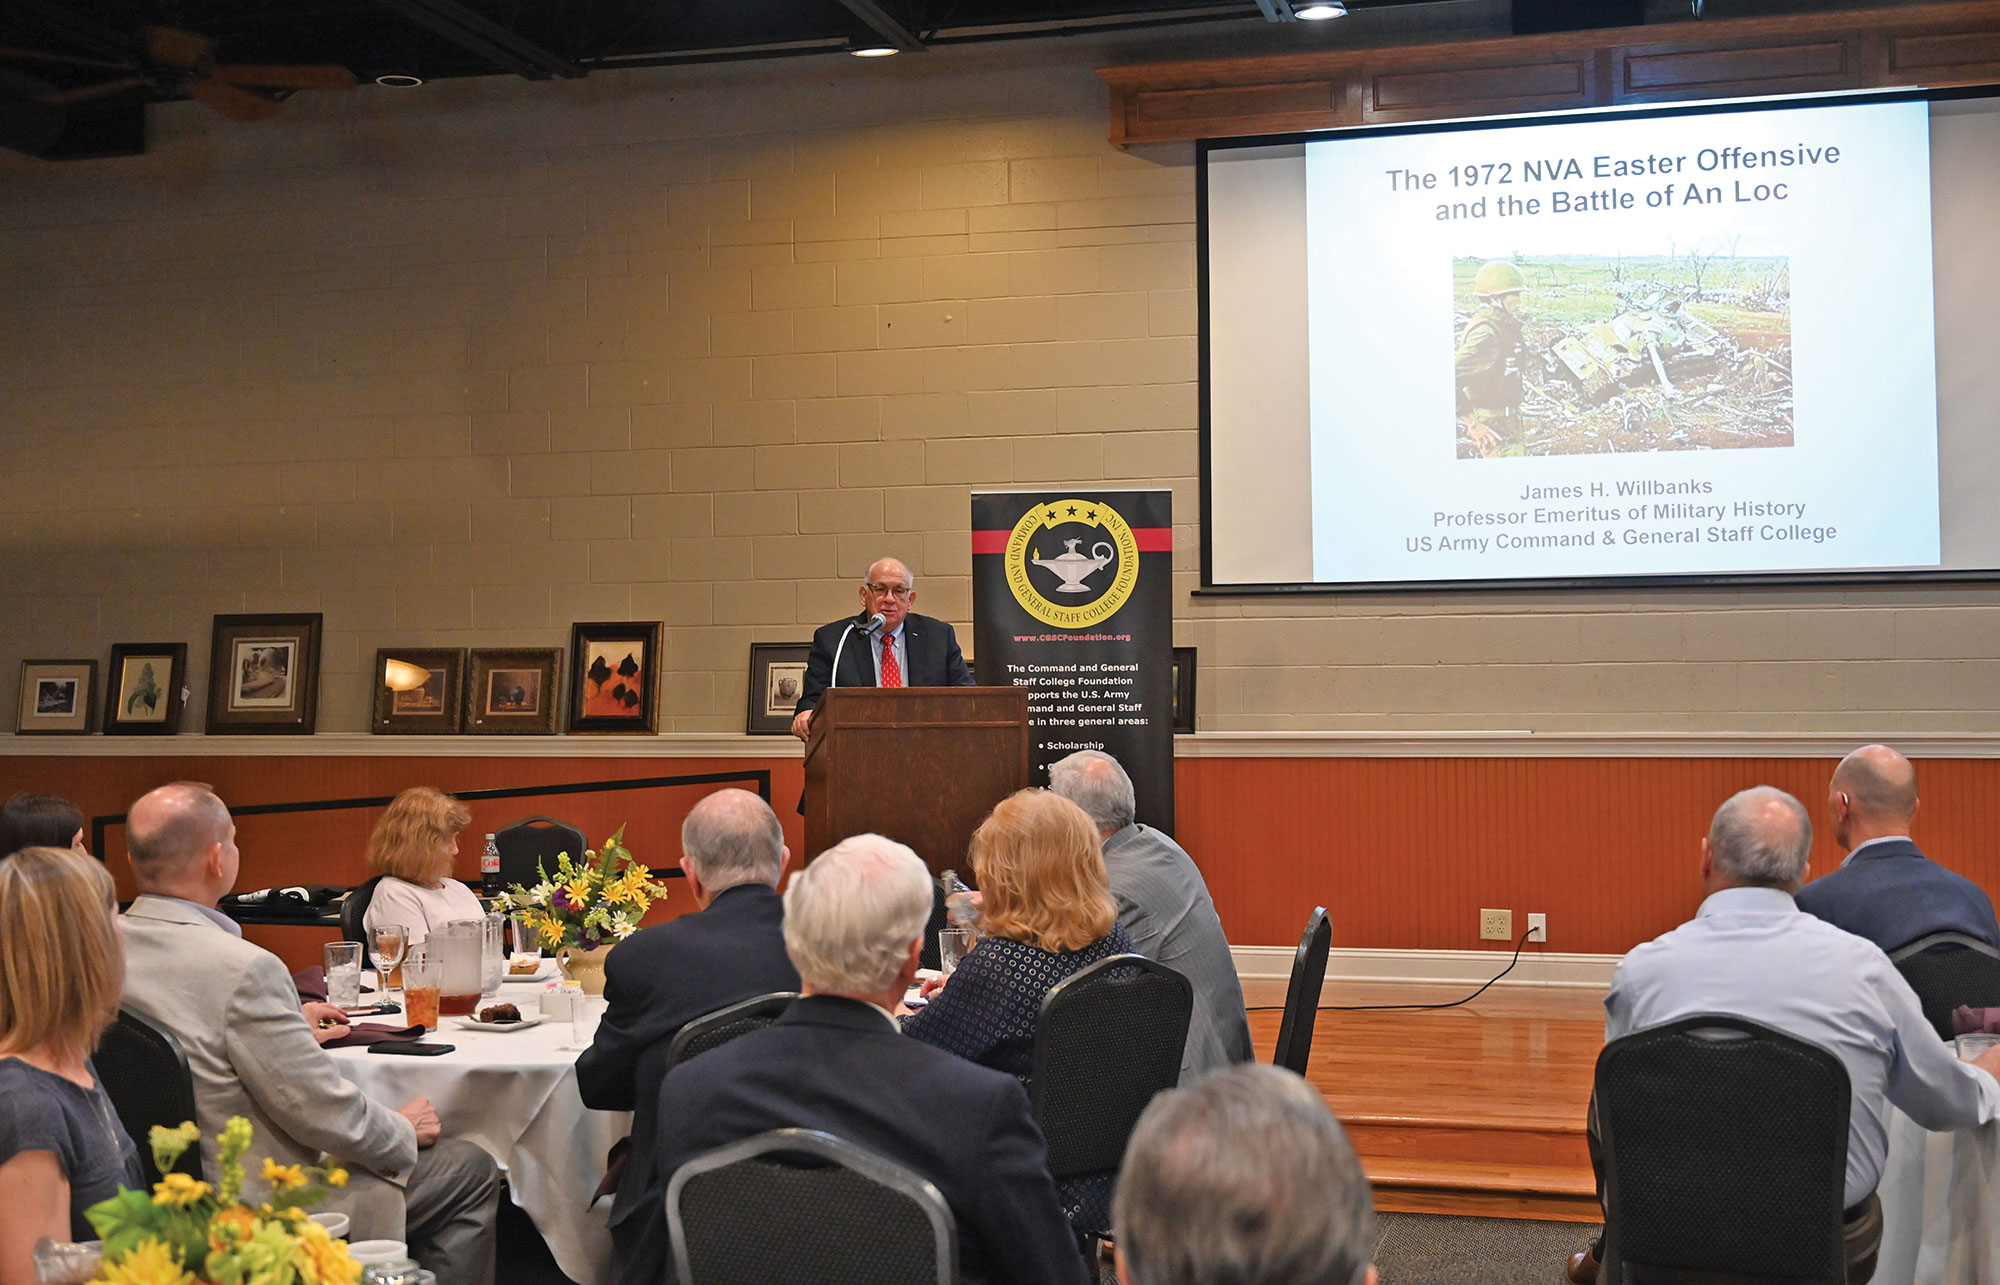 Dr. James H. Willbanks, Professor Emeritus and former General of the Army George C. Marshall Chair of Military History at the U.S. Army Command and General Staff College and decorated Vietnam War veteran, presents the 14th lecture in the CGSC Foundation's Vietnam War Commemoration Lecture Series on May 12, 2022, at June's Northland in downtown Leavenworth, Kansas.